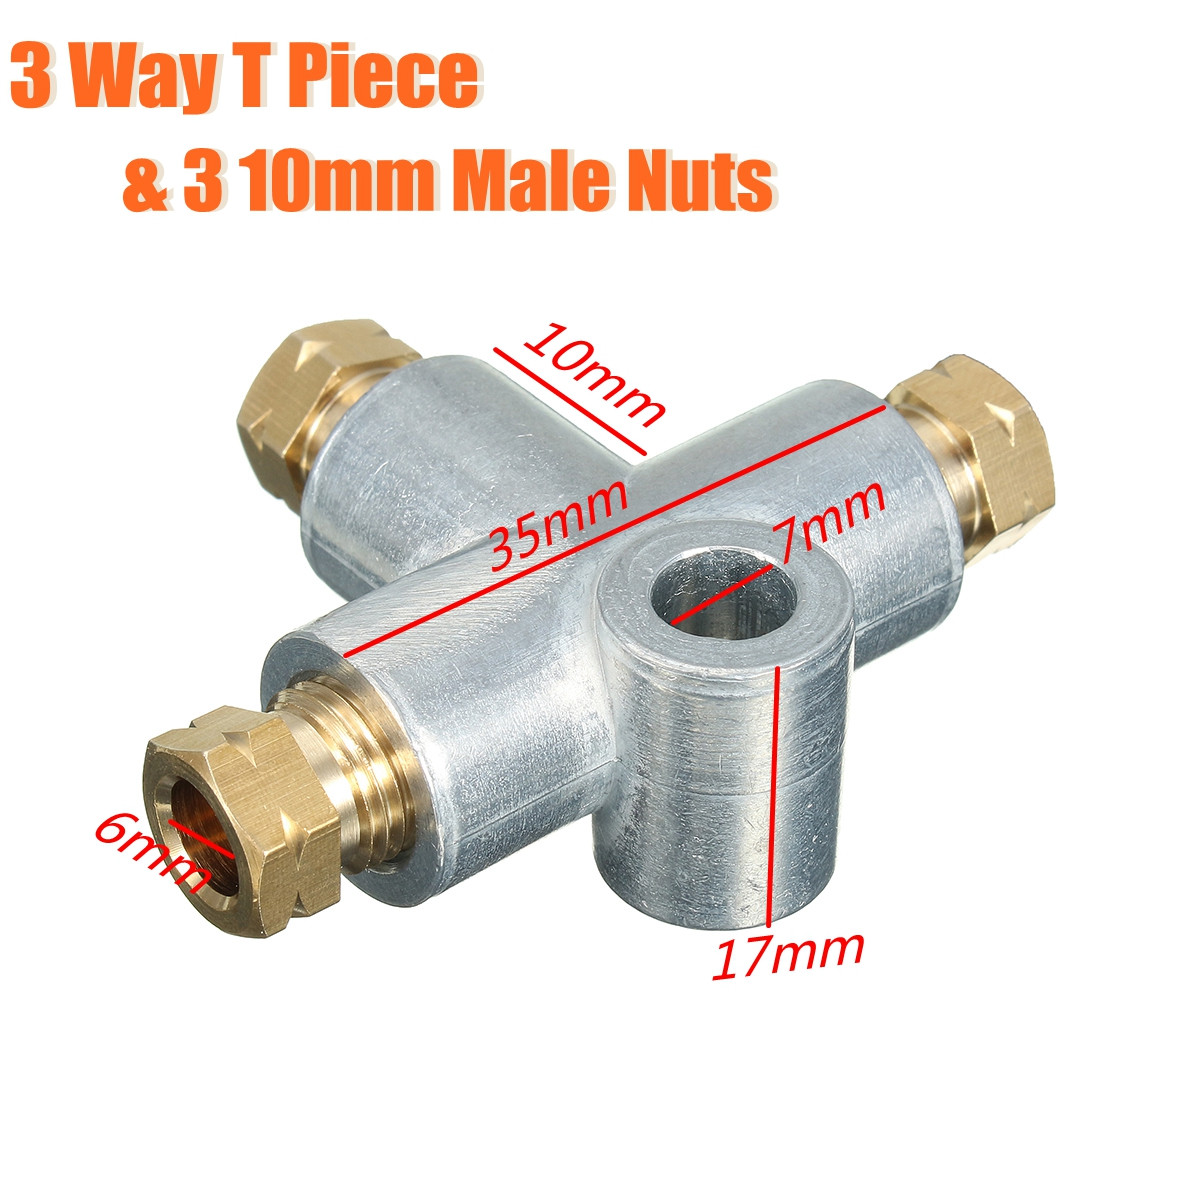 New Silver 3 Way T Piece Tee Brake Pipe With 3 M10 Male Nuts Short Metric Copper 3/16 10mm Inch Distributor Replacement Parts